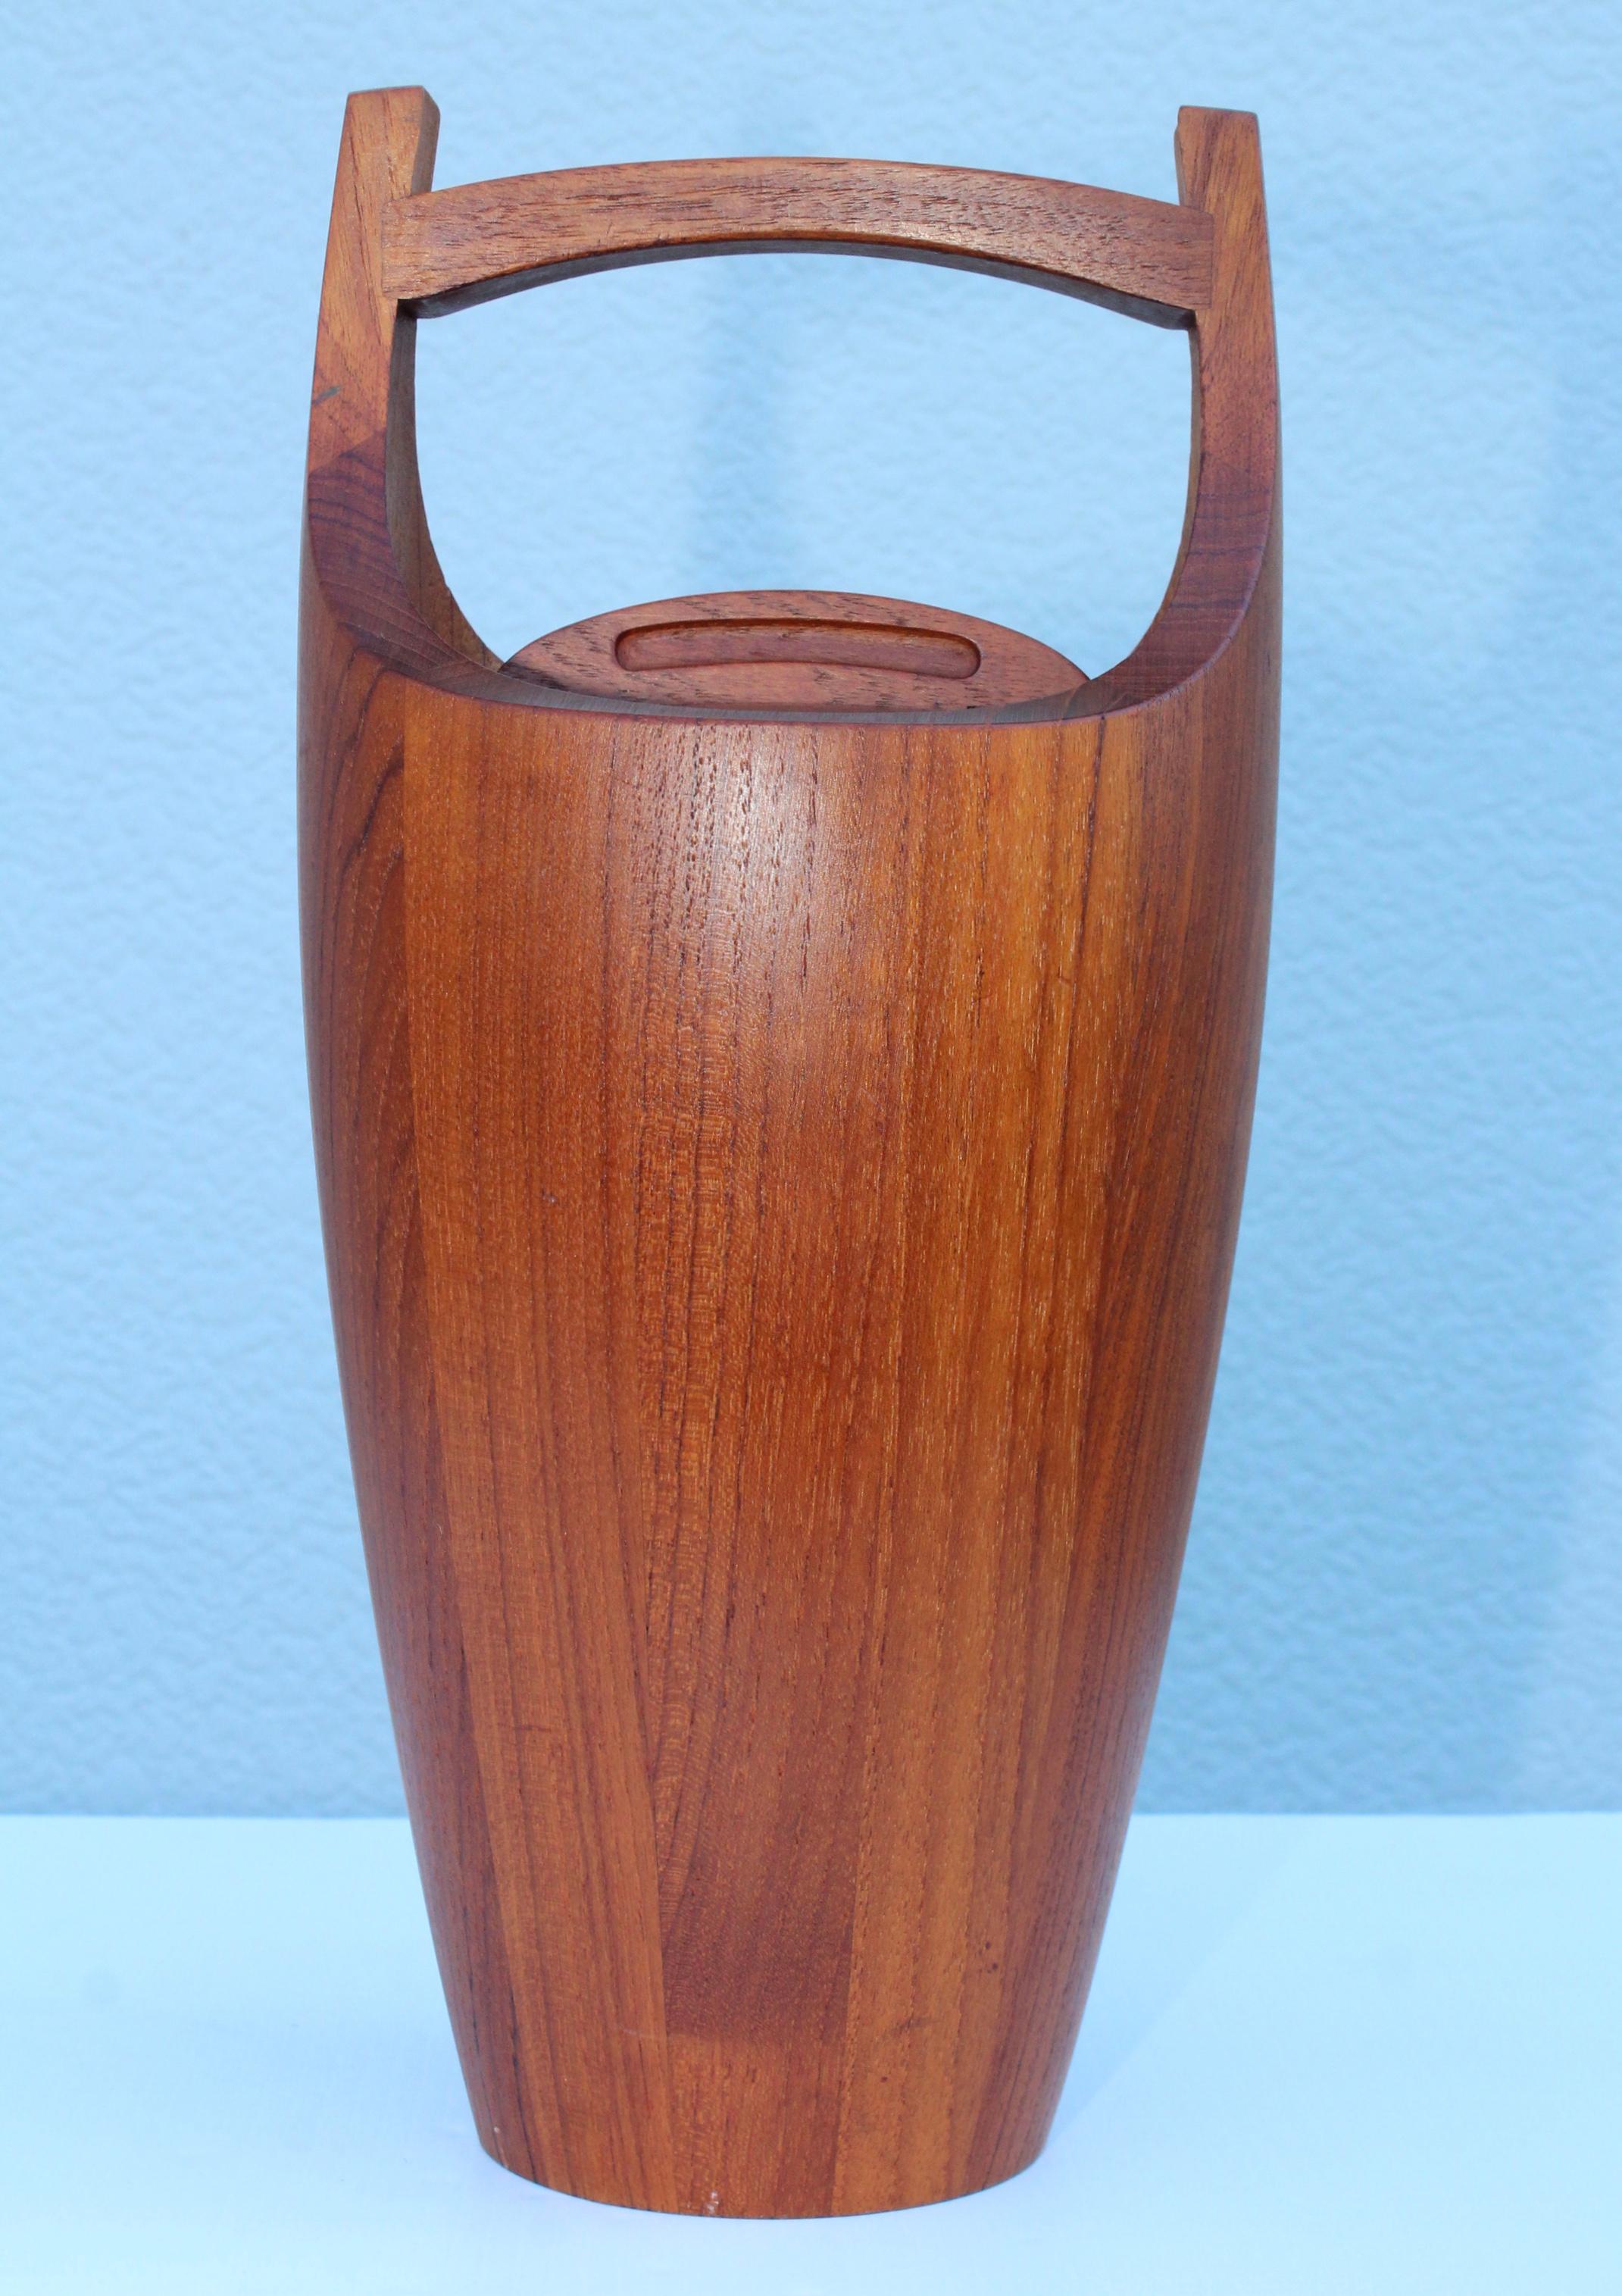 1950s early Jens Quitsgaard designed for Dansk teak ice bucket, in very good vintage condition.